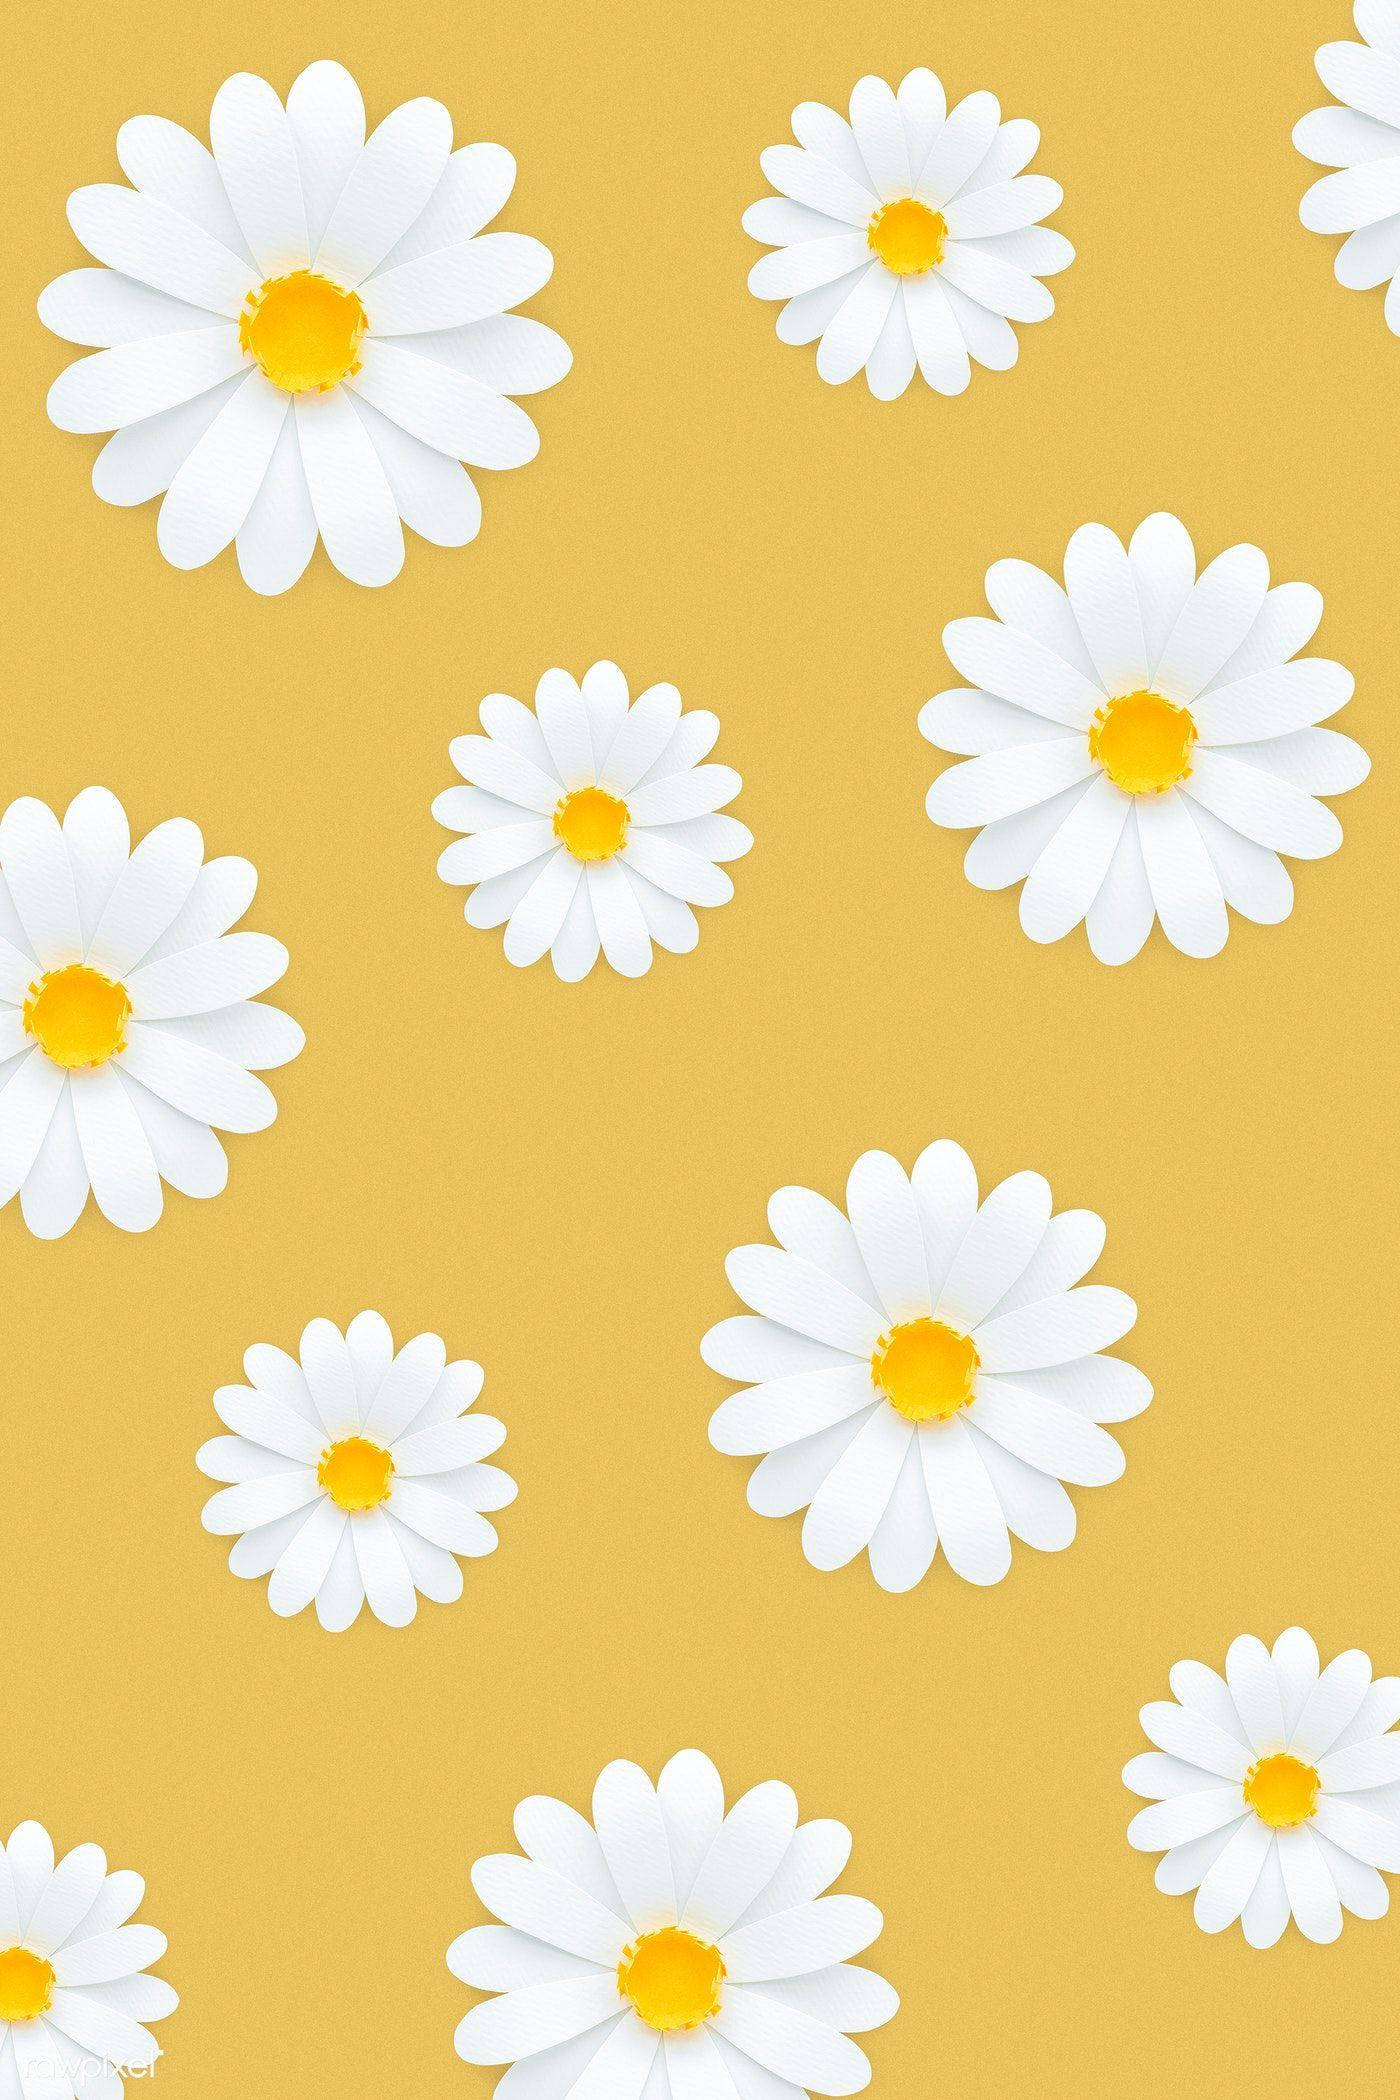 Download White Daisy Aesthetic In Yellow Wallpaper | Wallpapers.com